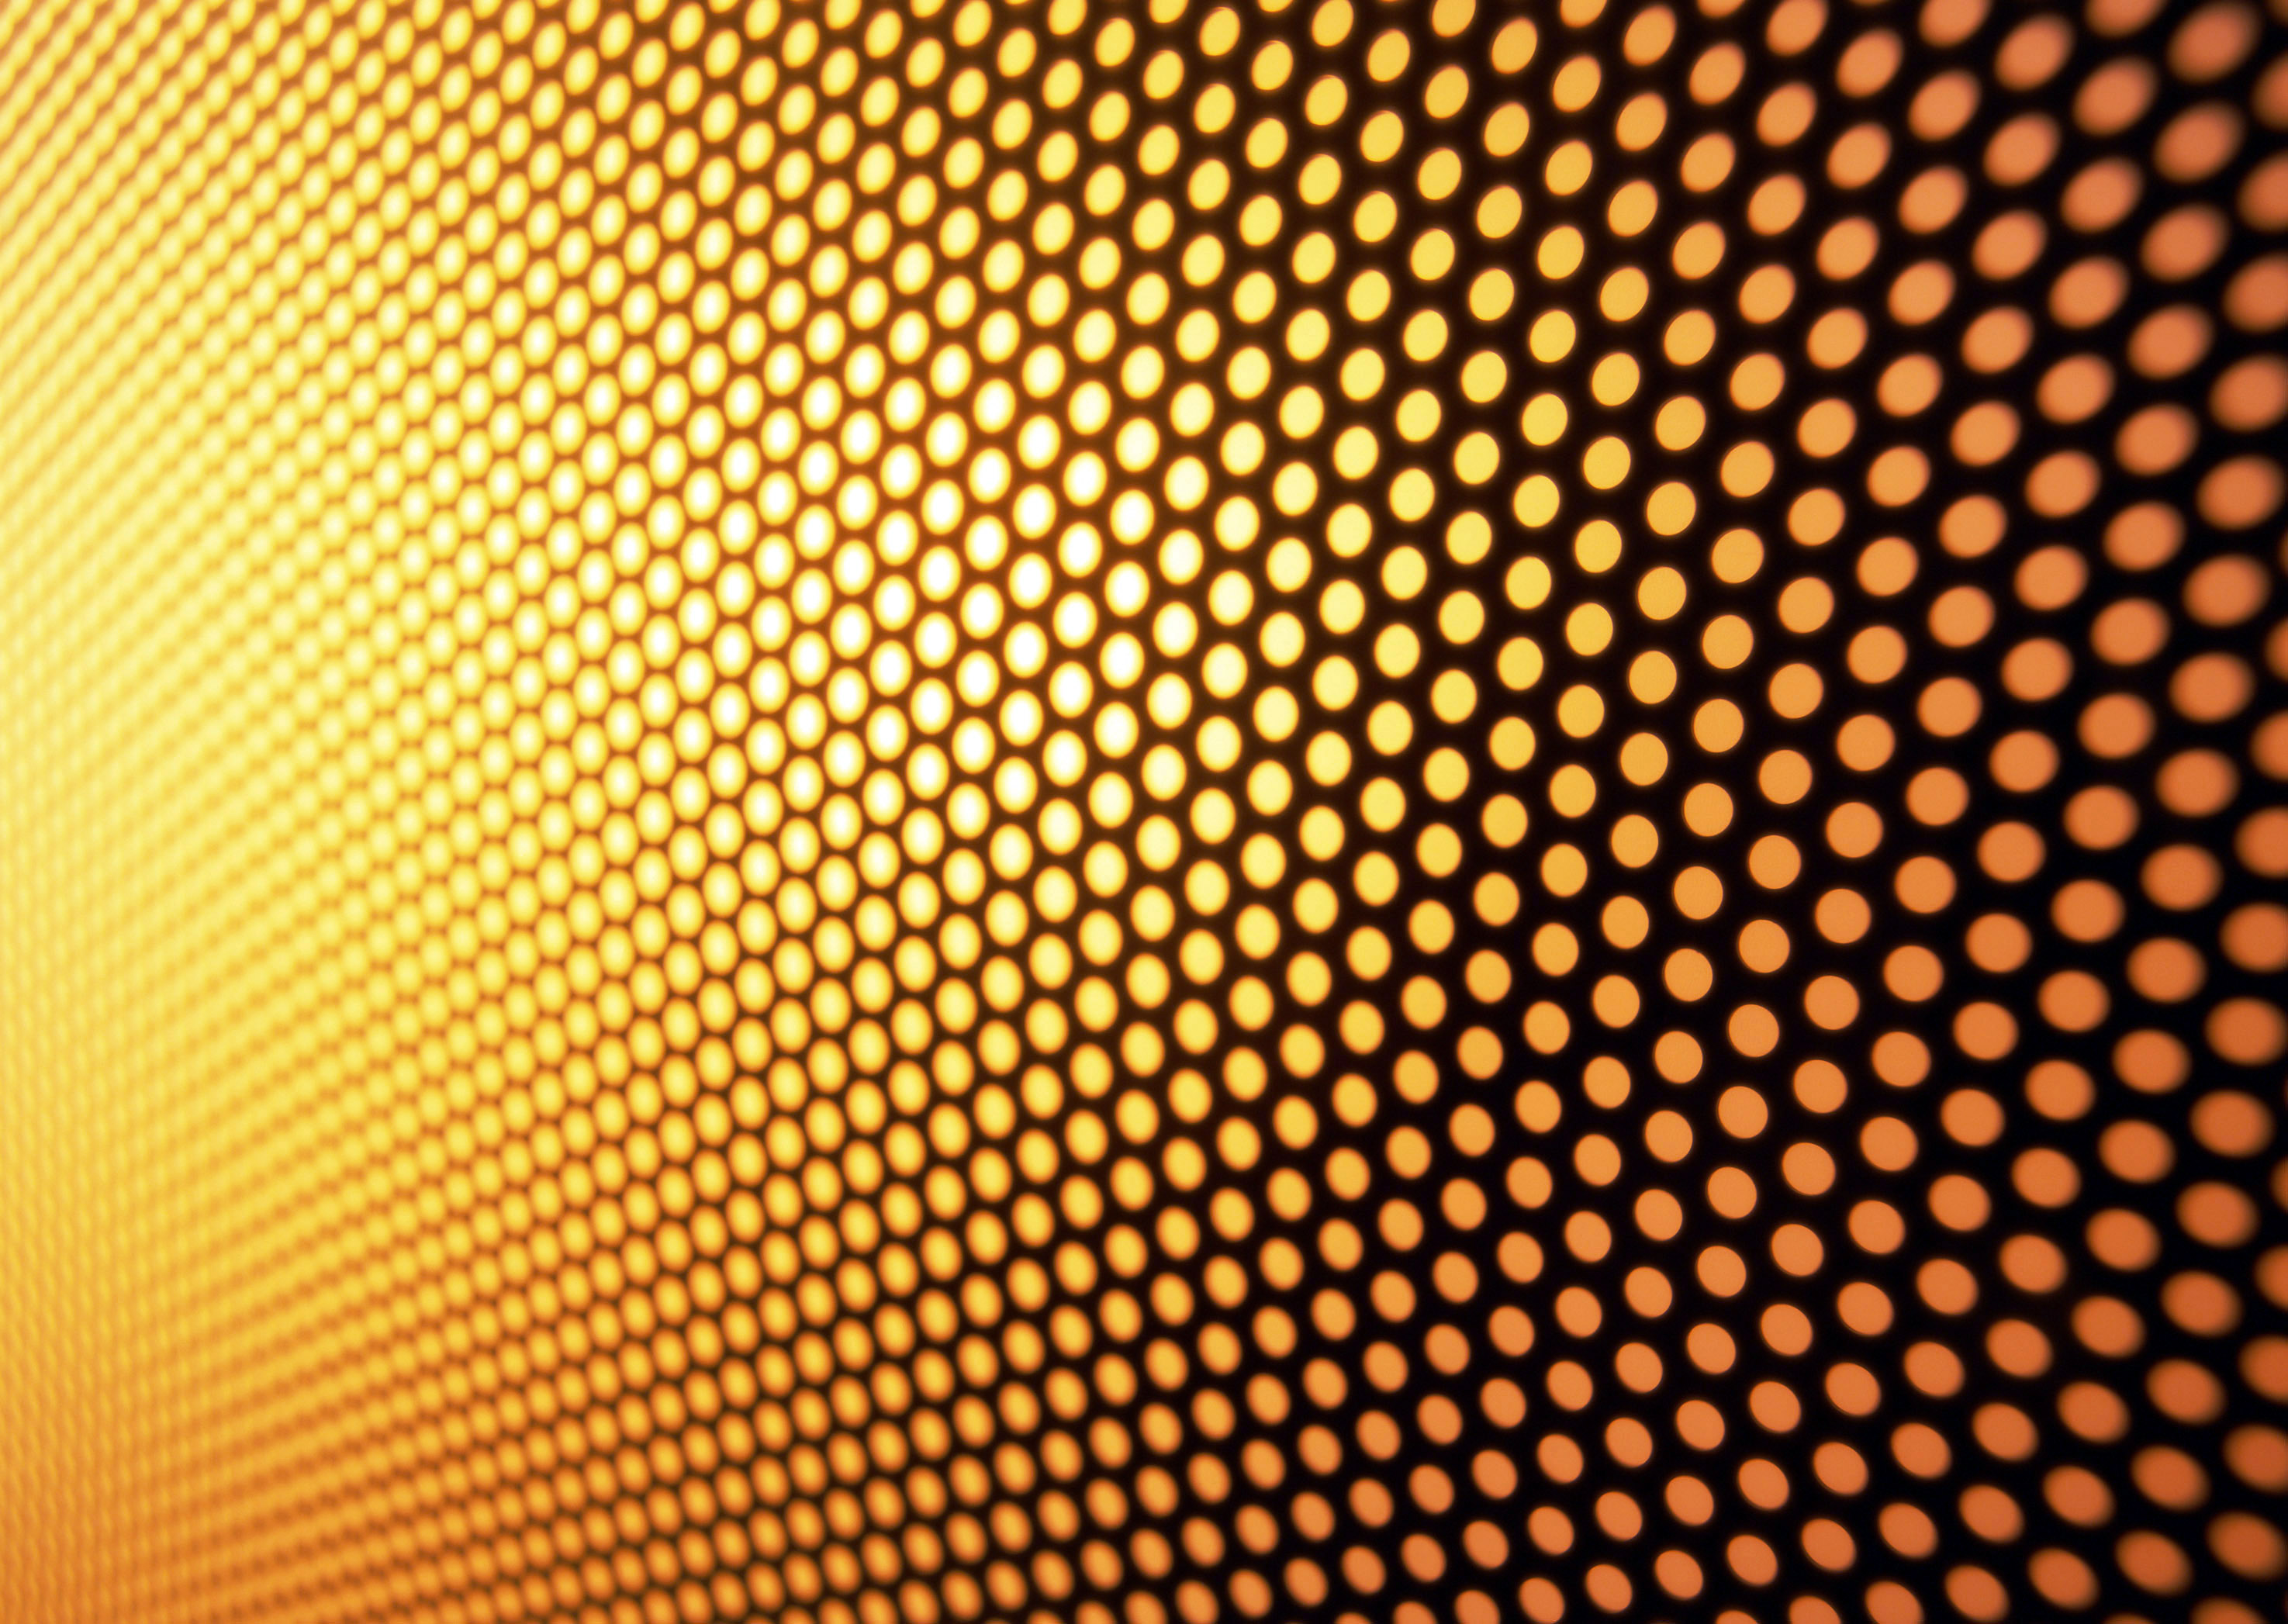 Yellow, Material, Honeycomb, Vector Graphics, Mesh - High Resolution Abstract Design , HD Wallpaper & Backgrounds